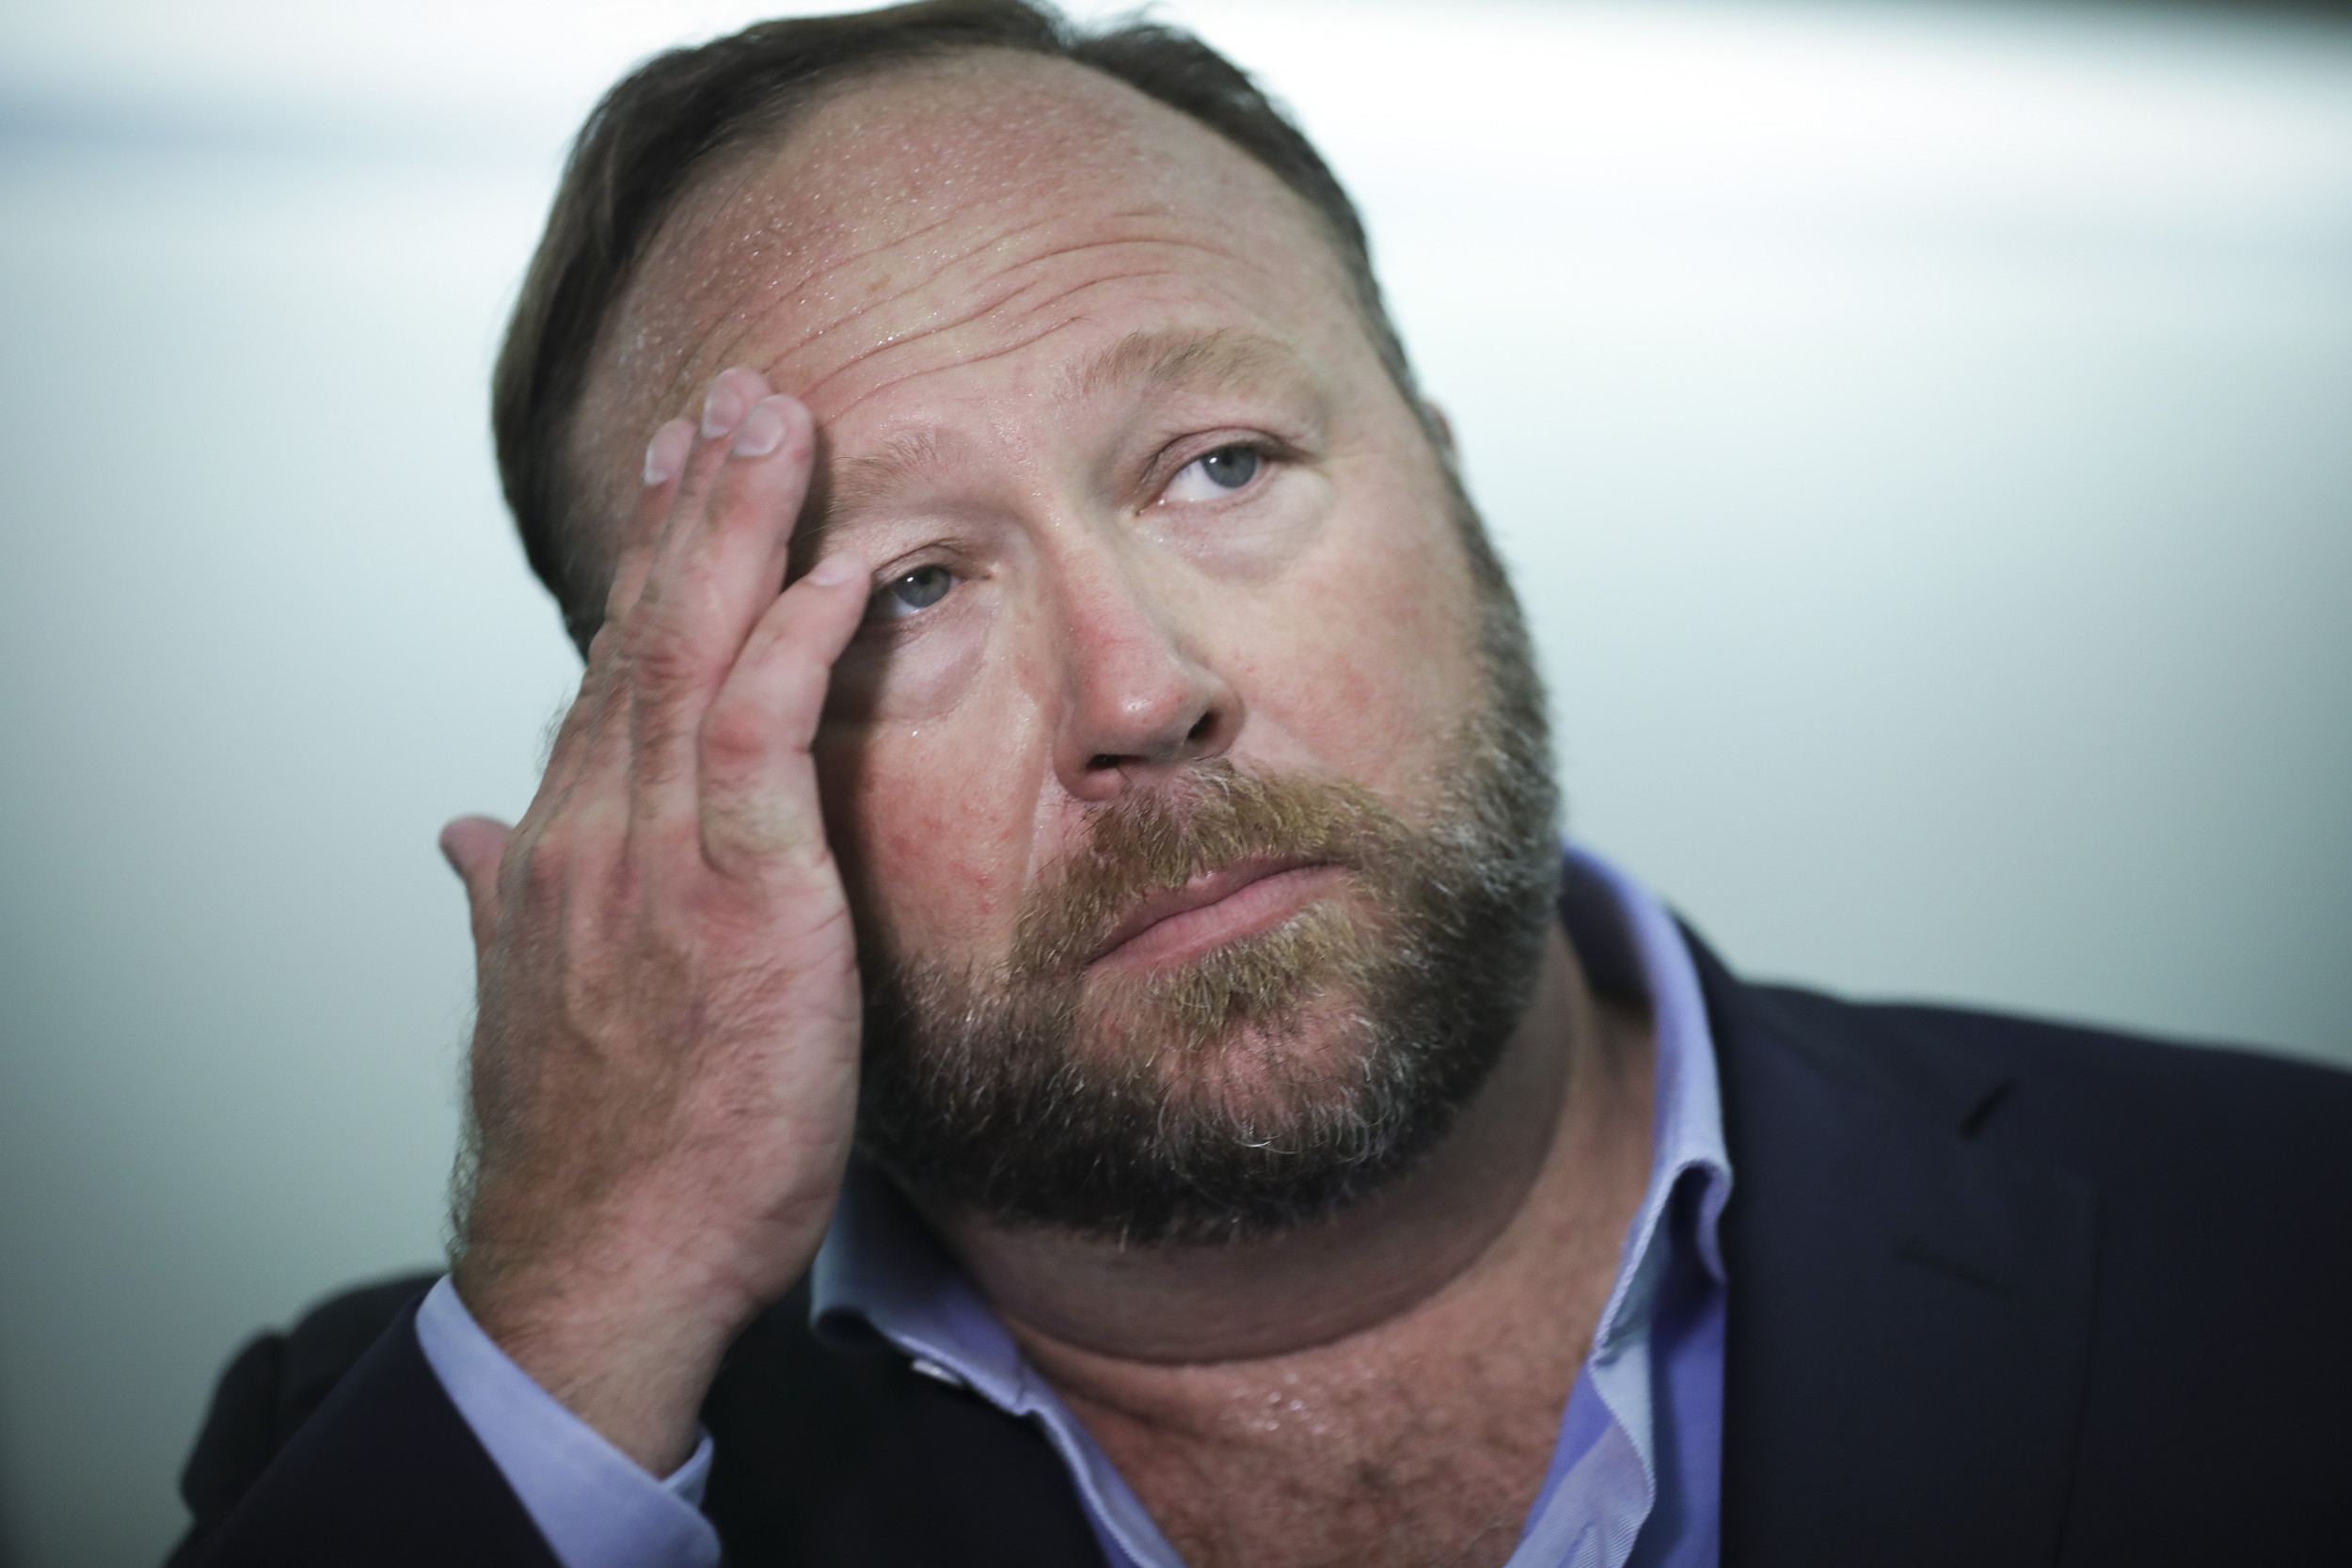 alex jones issues rallying cry to truckers after donald trump fine